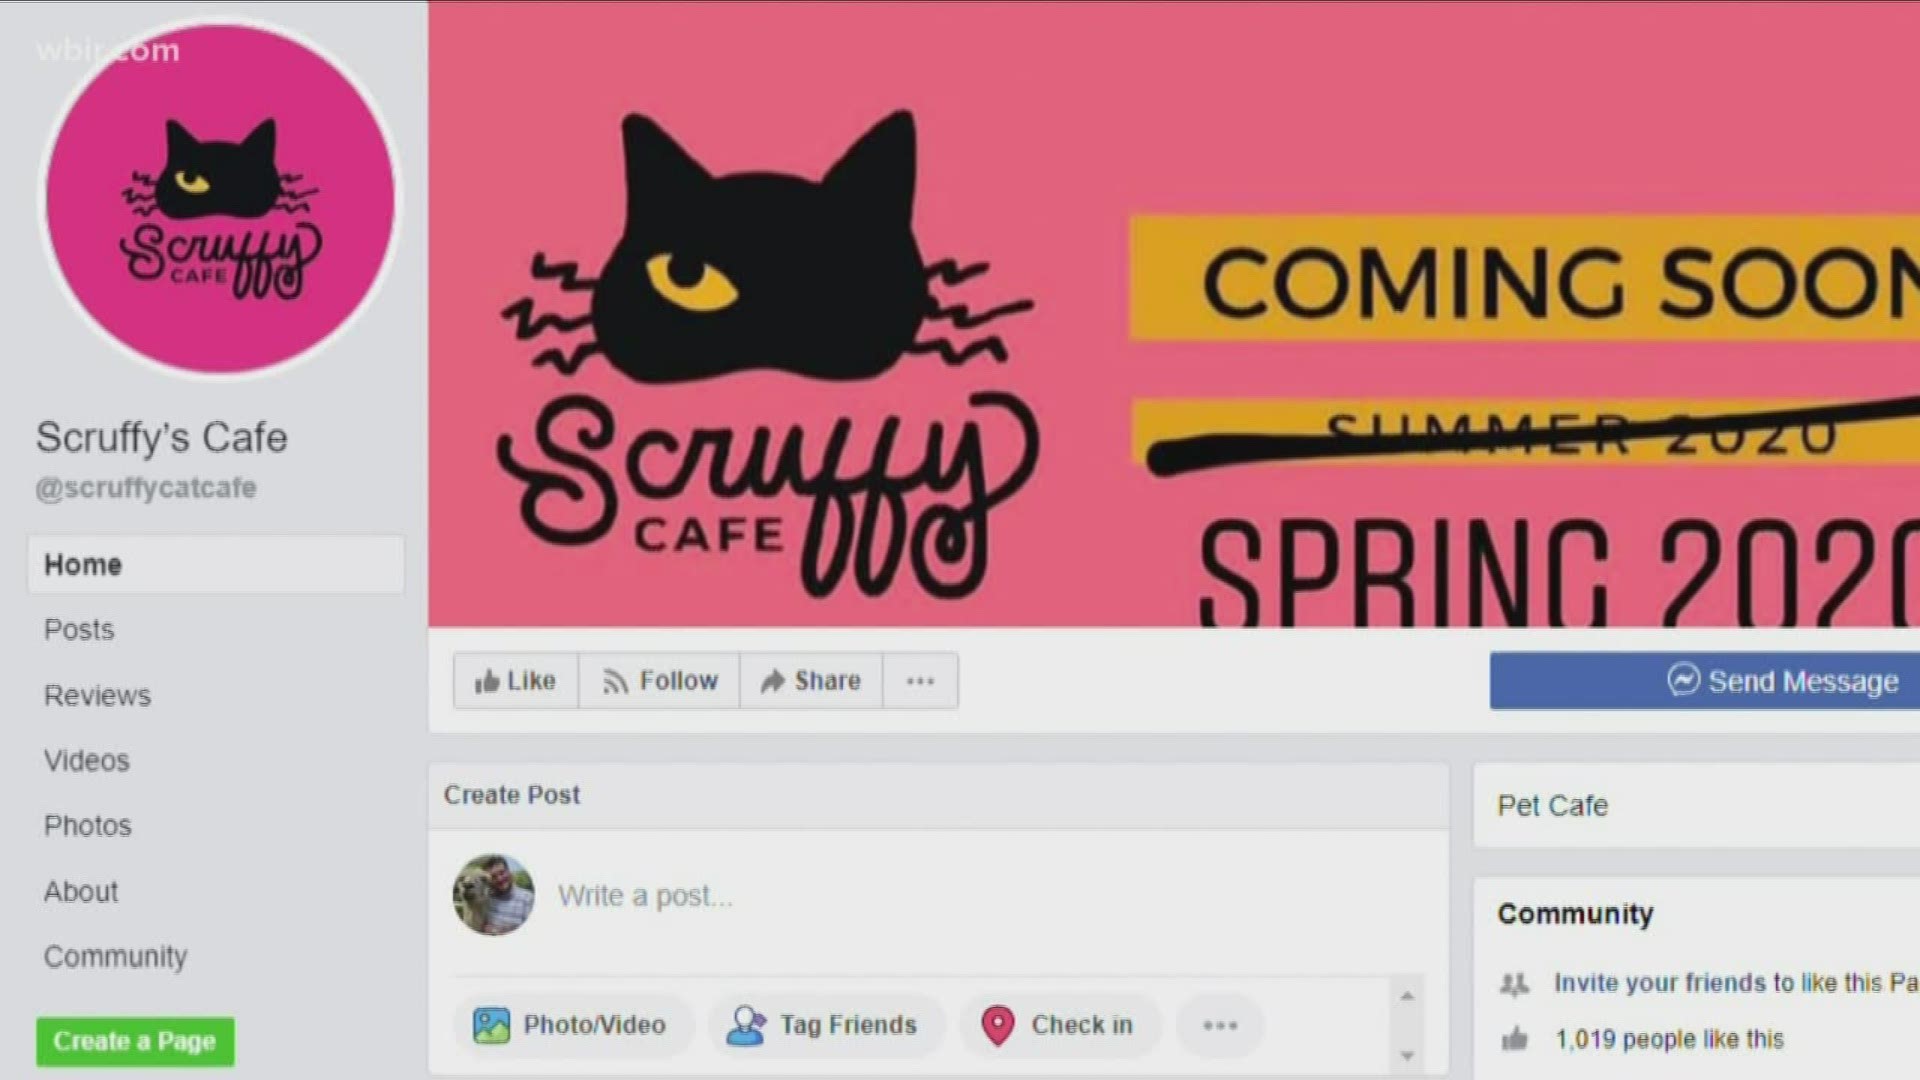 Scruffy's Cafe plans to open the first cat cafe in Knoxville this spring. It will be located on North Broadway near KBrew.